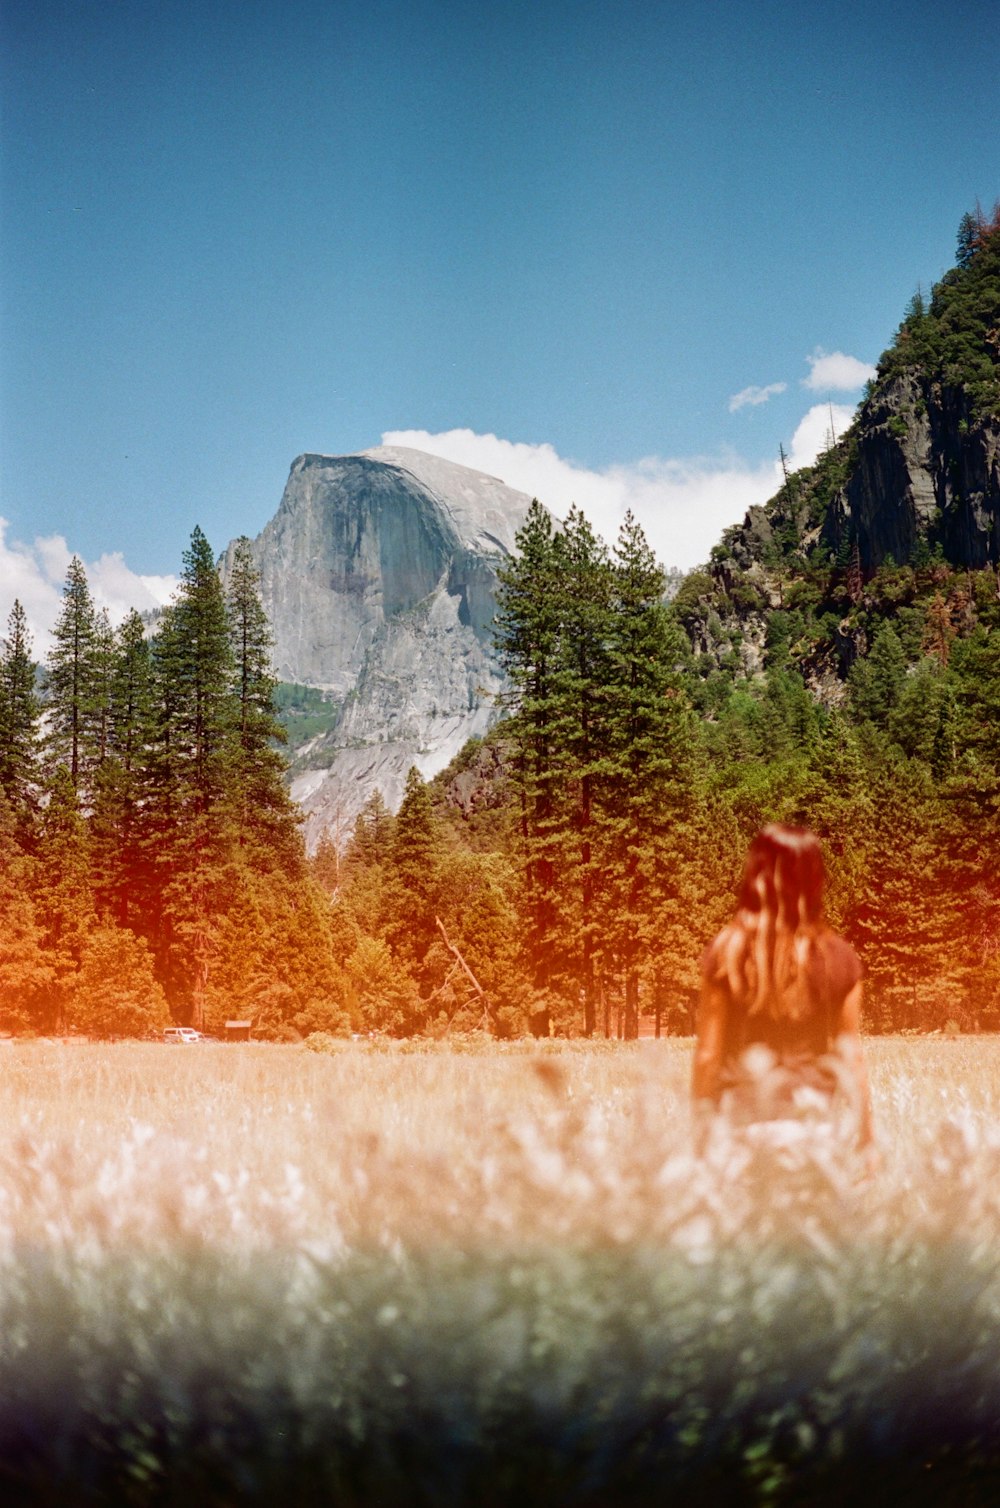 a person standing in a field with a mountain in the background